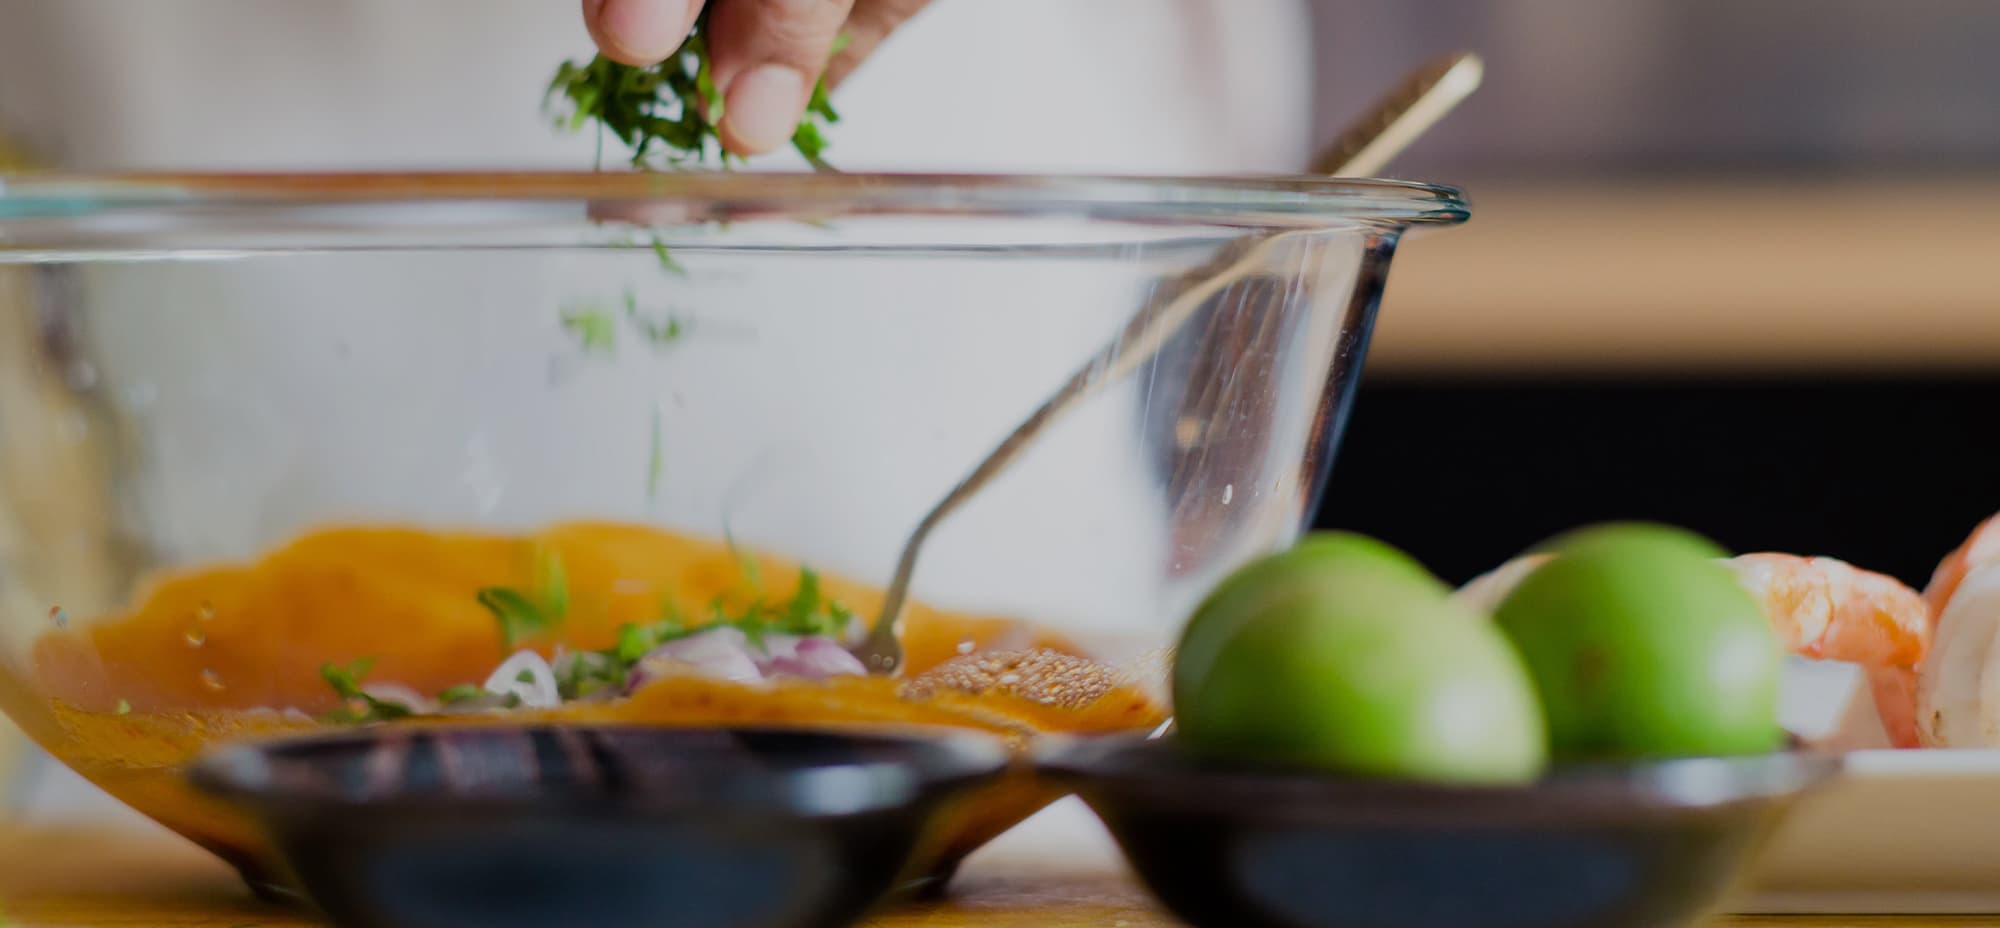 Image of a person adding fresh herbs to a bowl